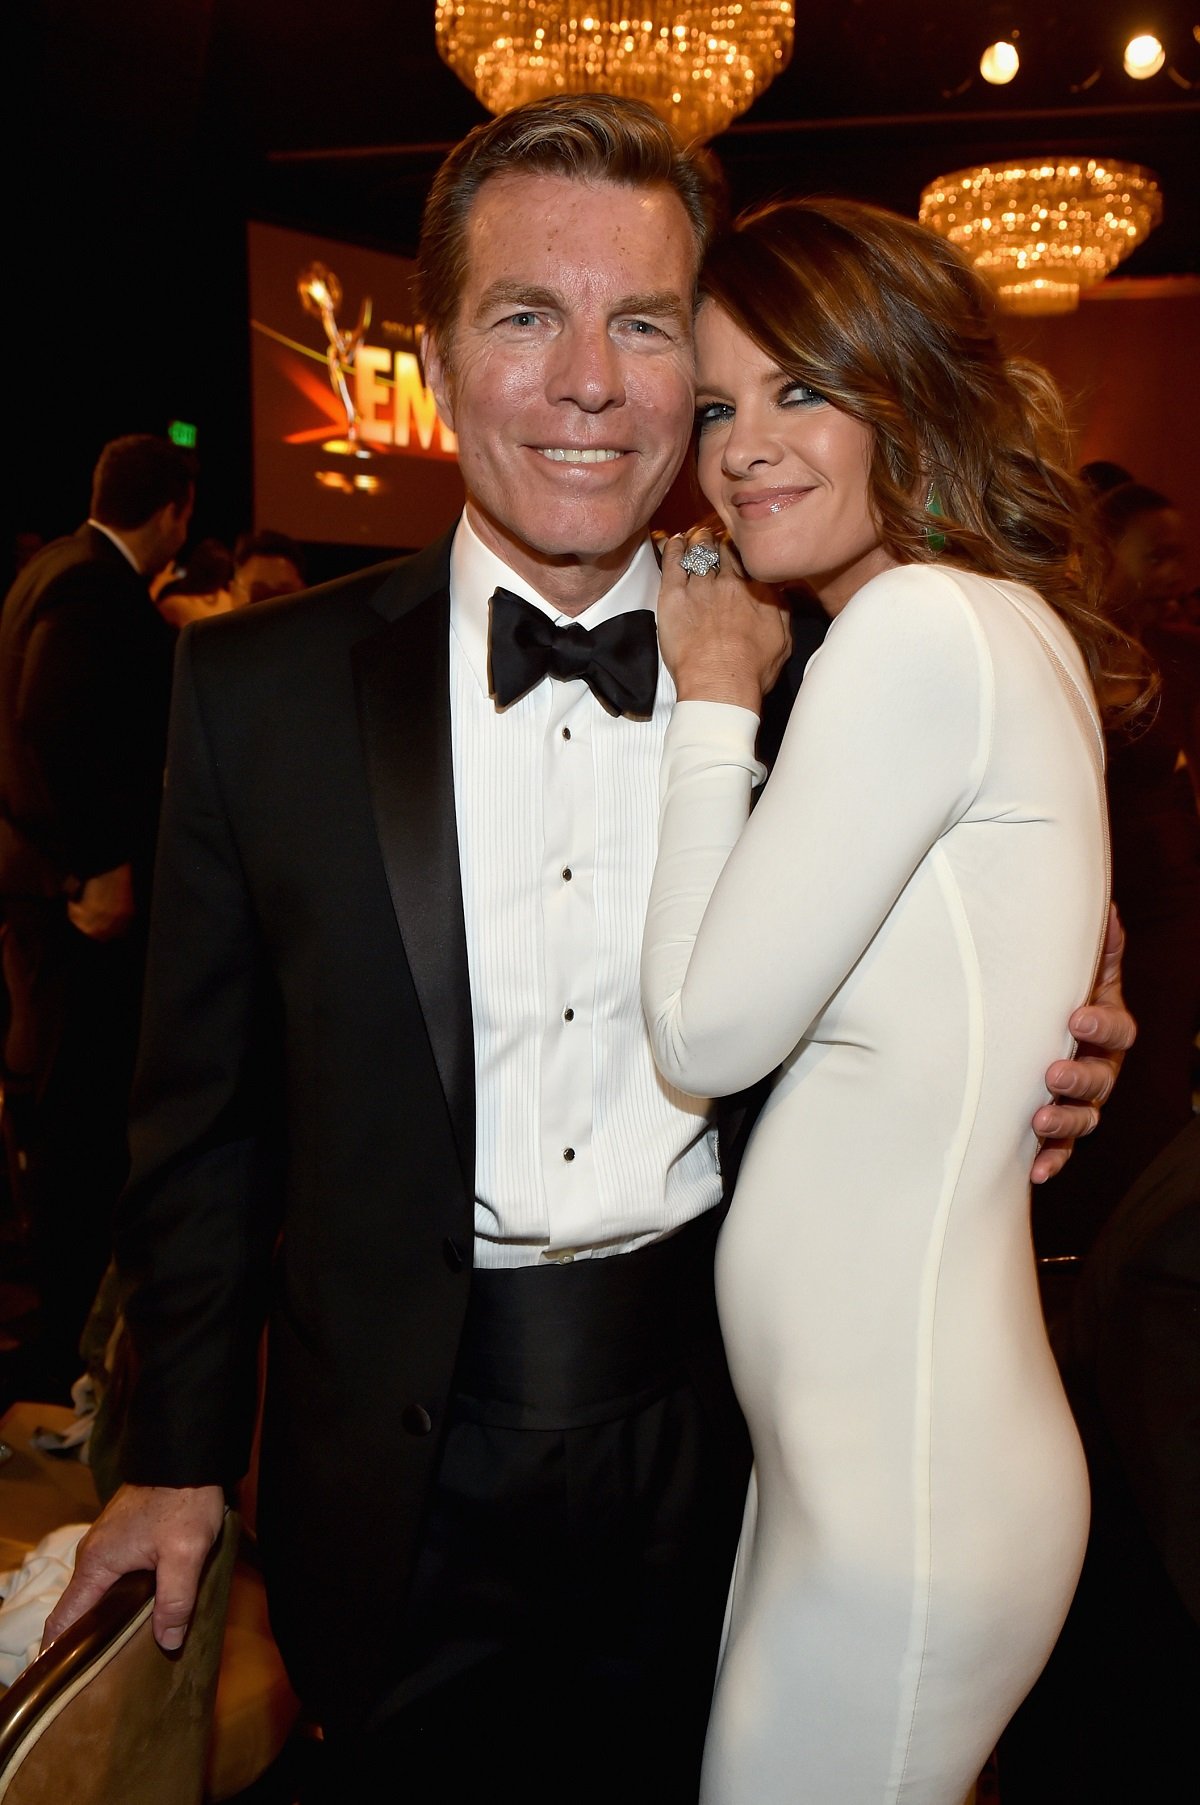 'The Young and the Restless' actors Peter Bergman and Michelle Stafford post together at the 2014 Daytime Emmys.